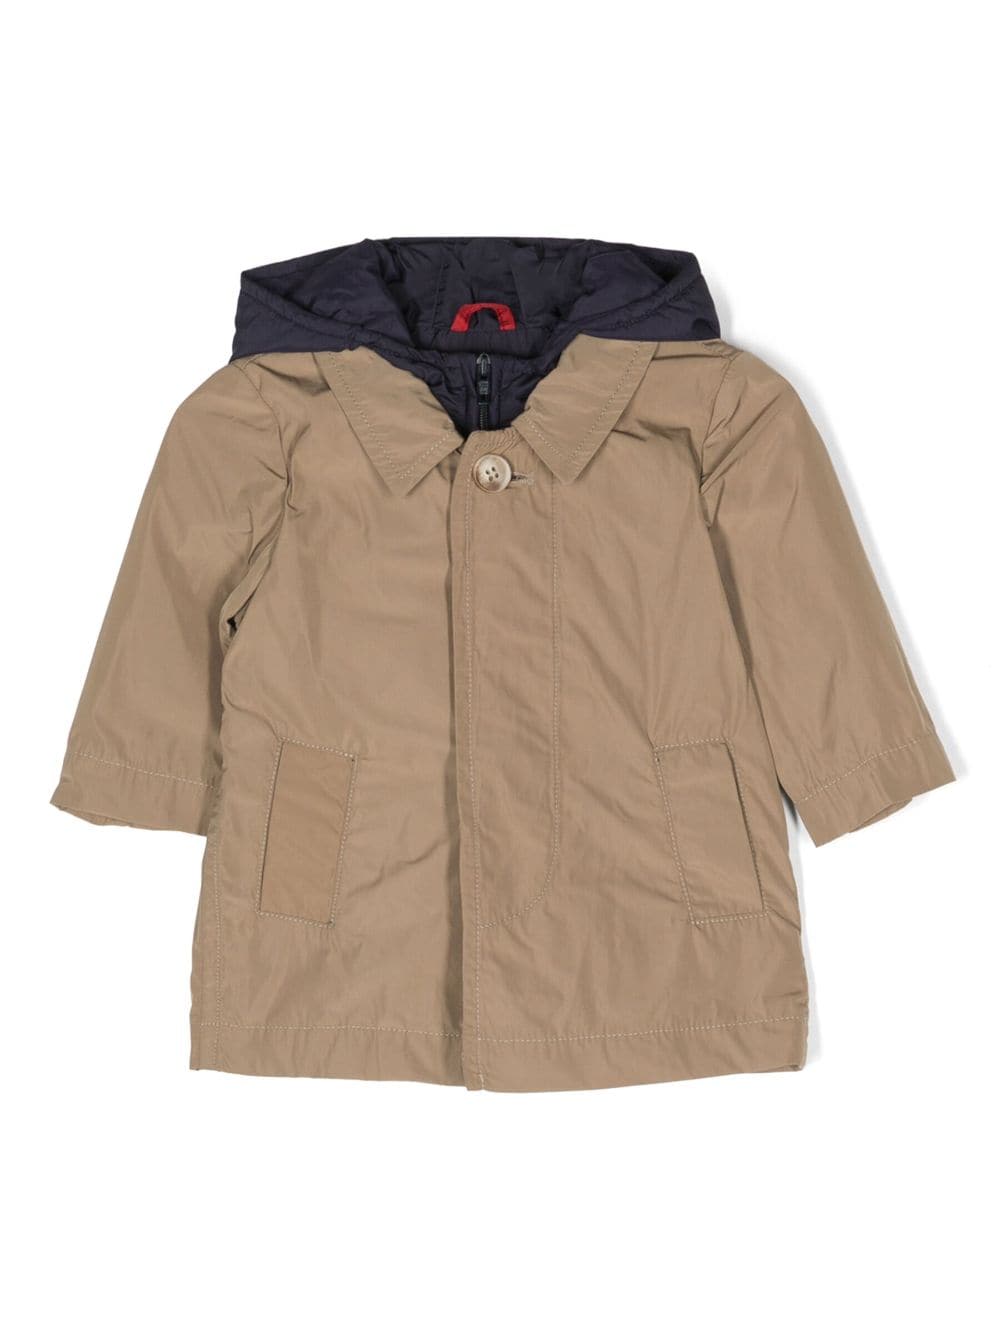 Fay Kids two-pocket hooded jacket - Brown von Fay Kids